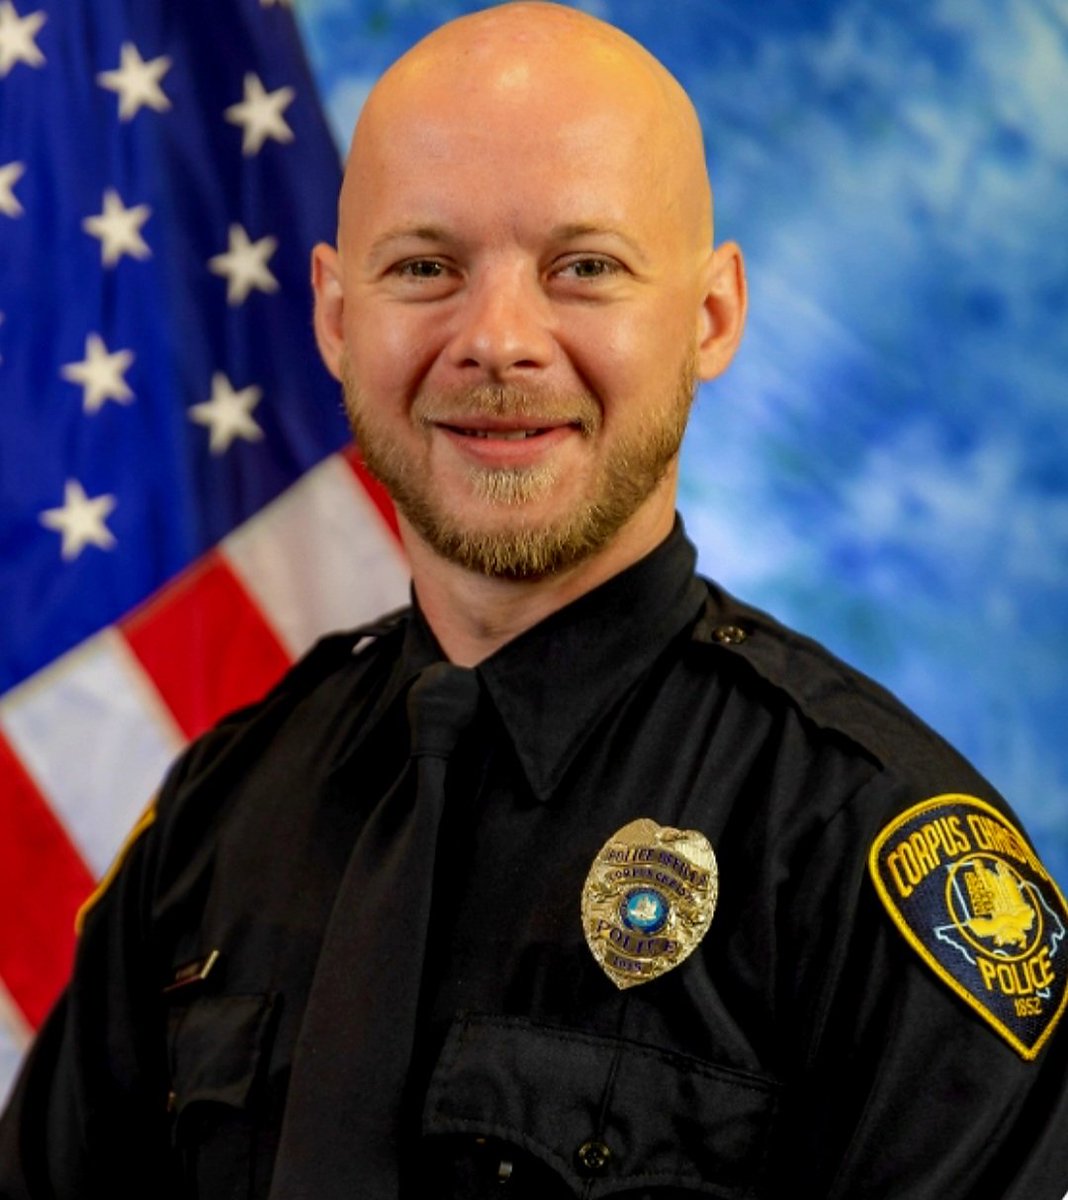 RIP, #CorpusChristi PO Kyle Hicks, EOW 4/24/24.
PO Hicks succumbed to gunshots received 4/20 investigating a domestic disturbance. He served two years & survived by his wife & 4 children.  
Always Honored, Never Forgotten.
#thesacrificecontinues #PAPD #PAPBA #papdprotectsnynj